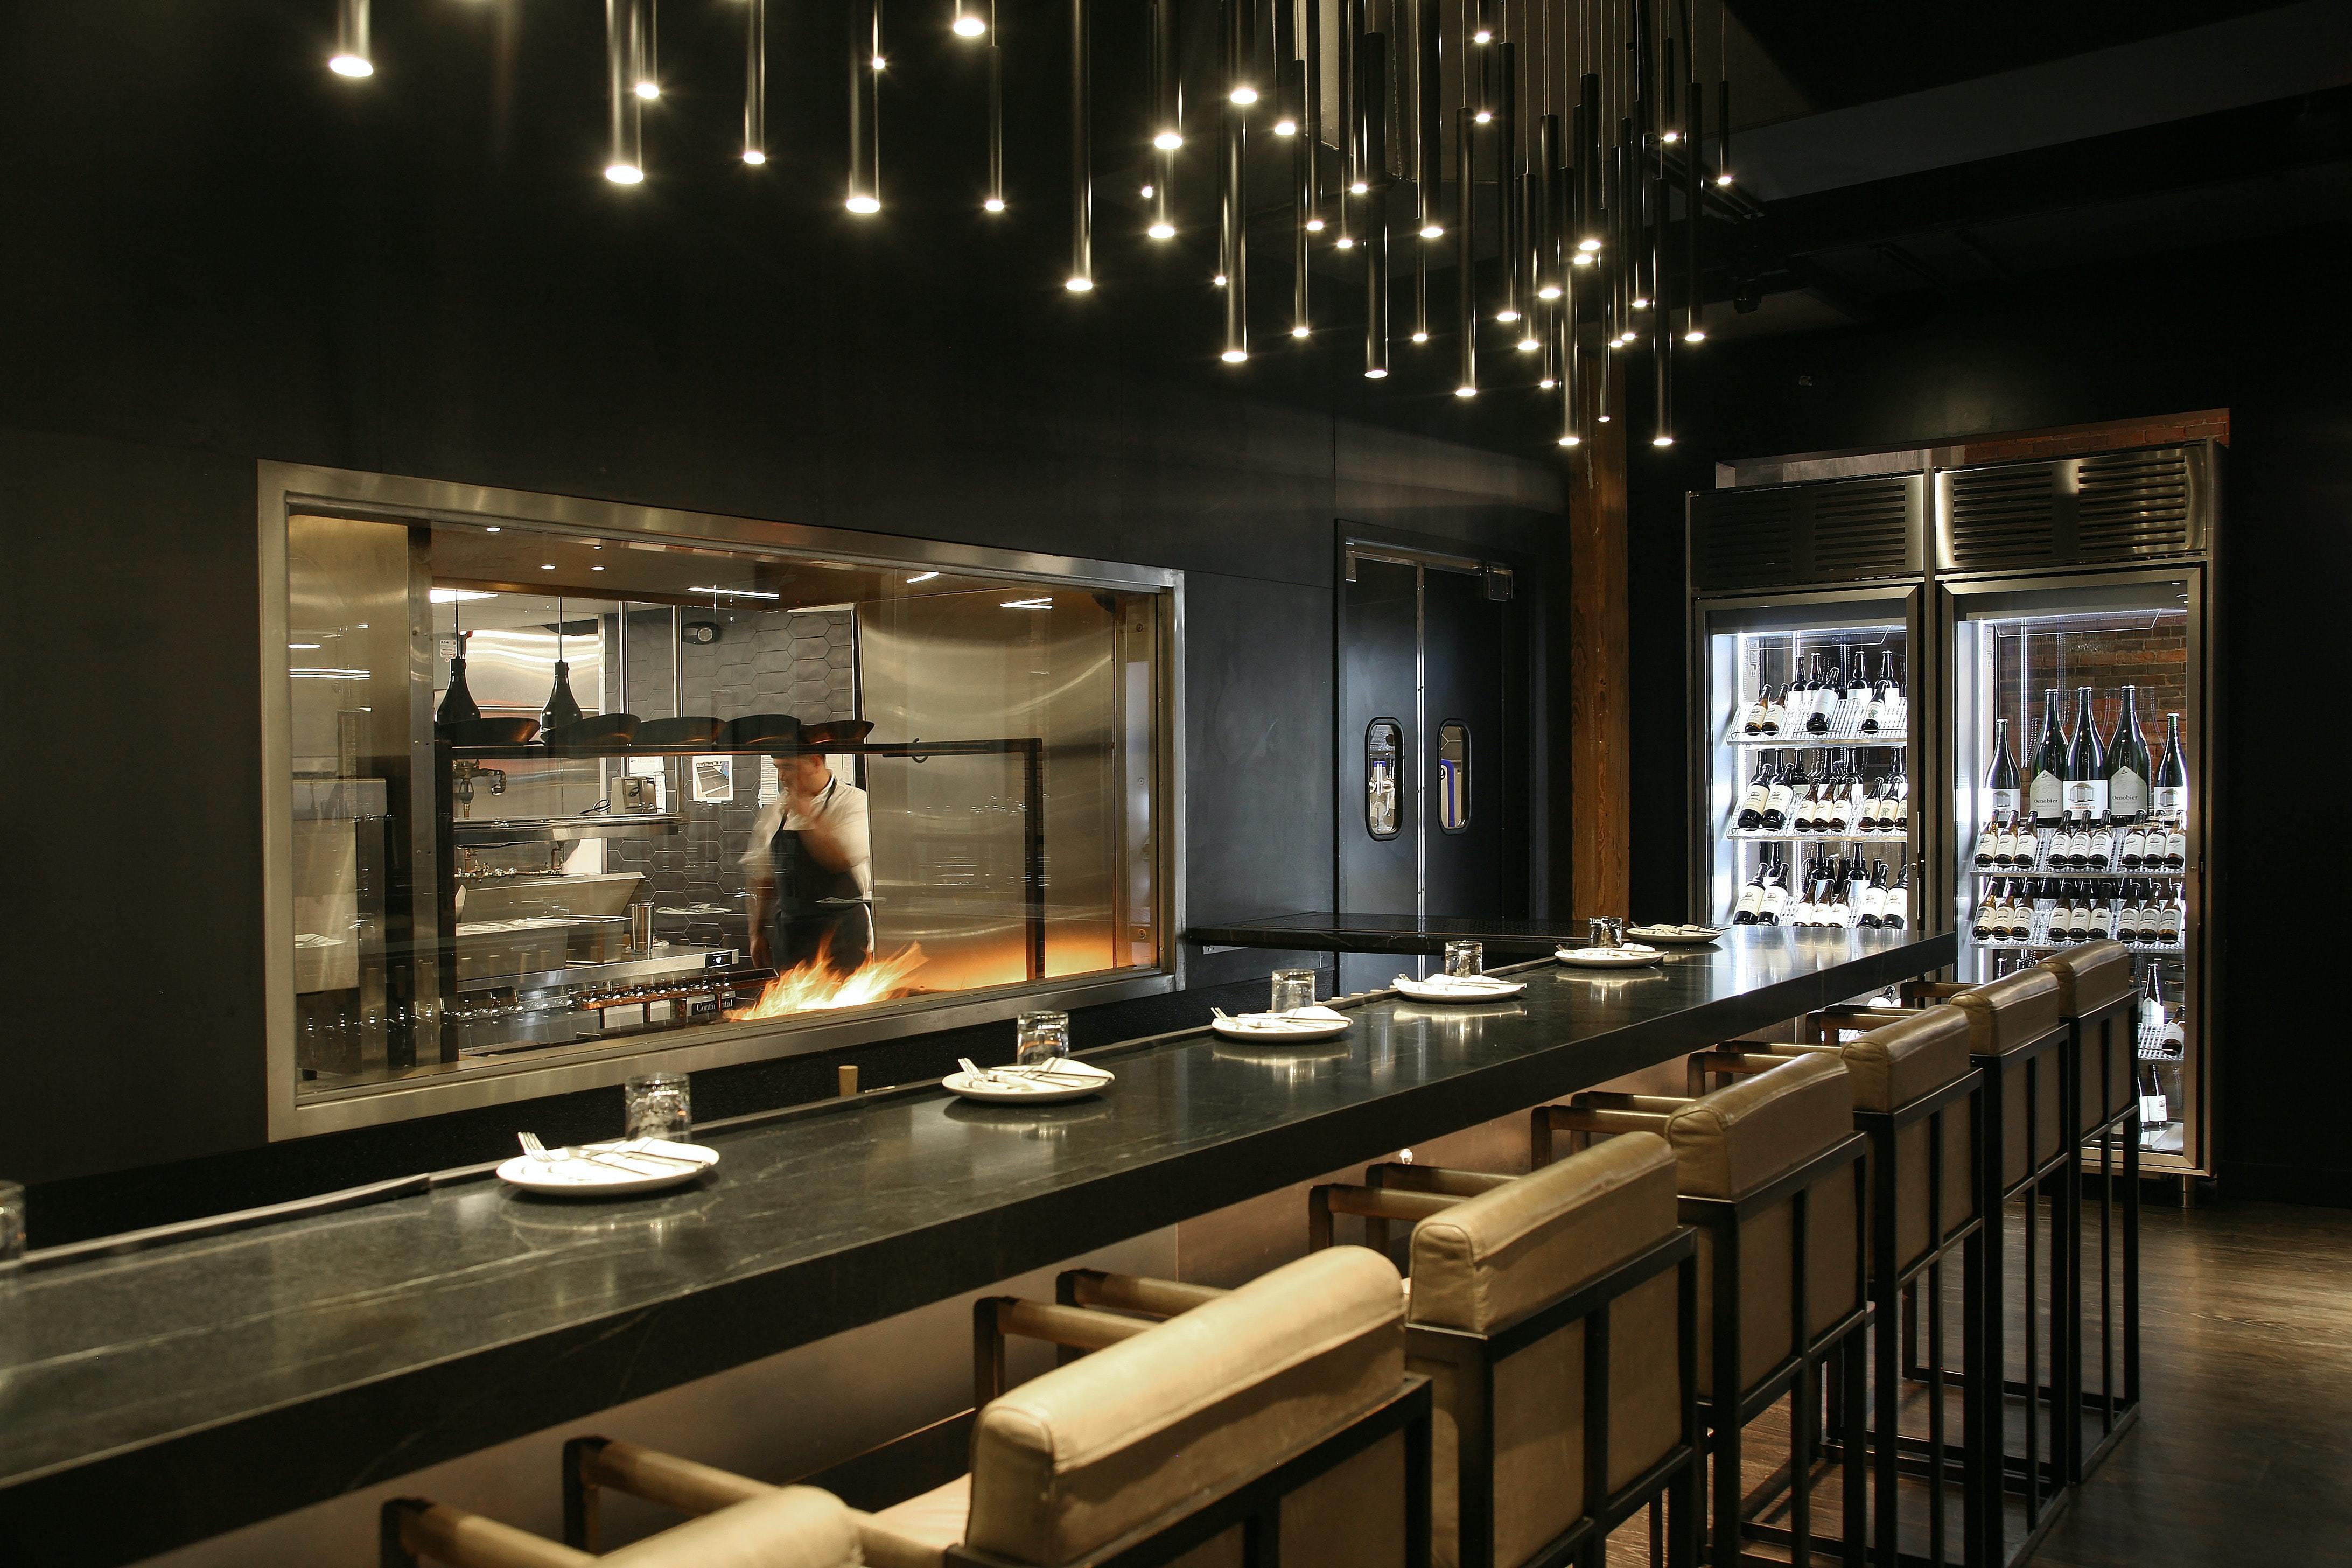 restaurant kitchen designs: how to set up a commercial